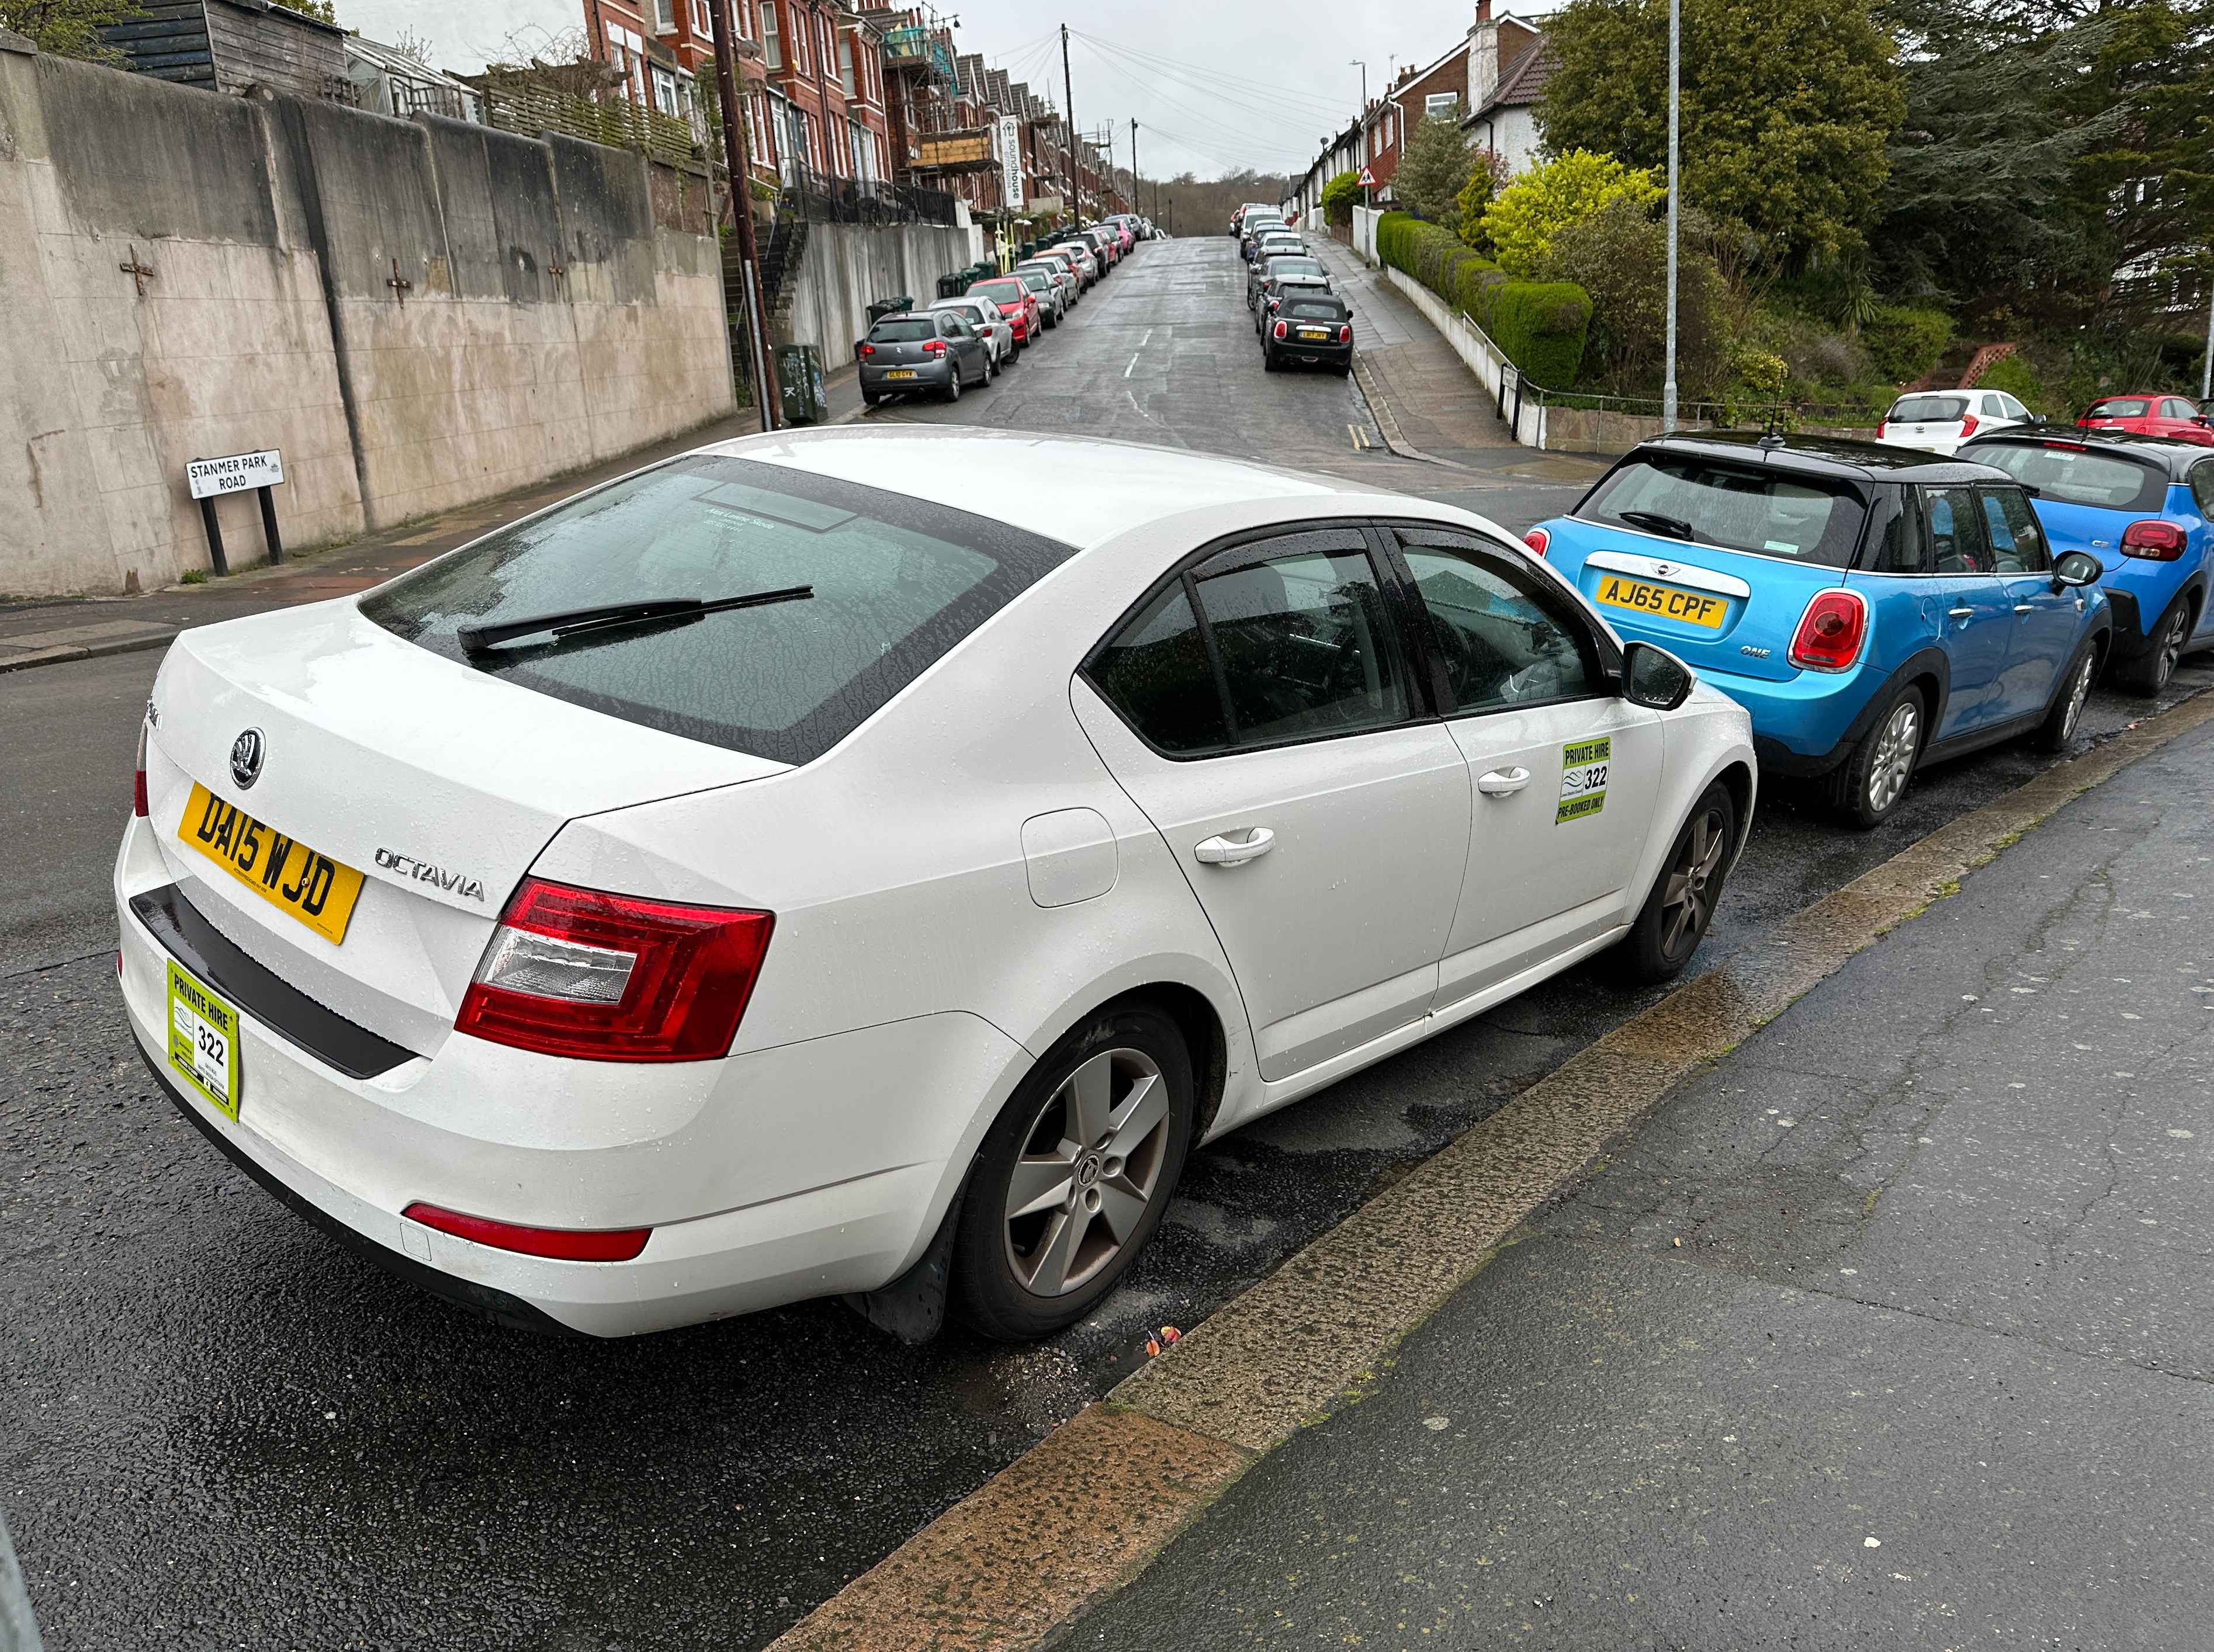 Photograph of DA15 WJD - a White Skoda Octavia taxi parked in Hollingdean by a non-resident. The second of five photographs supplied by the residents of Hollingdean.